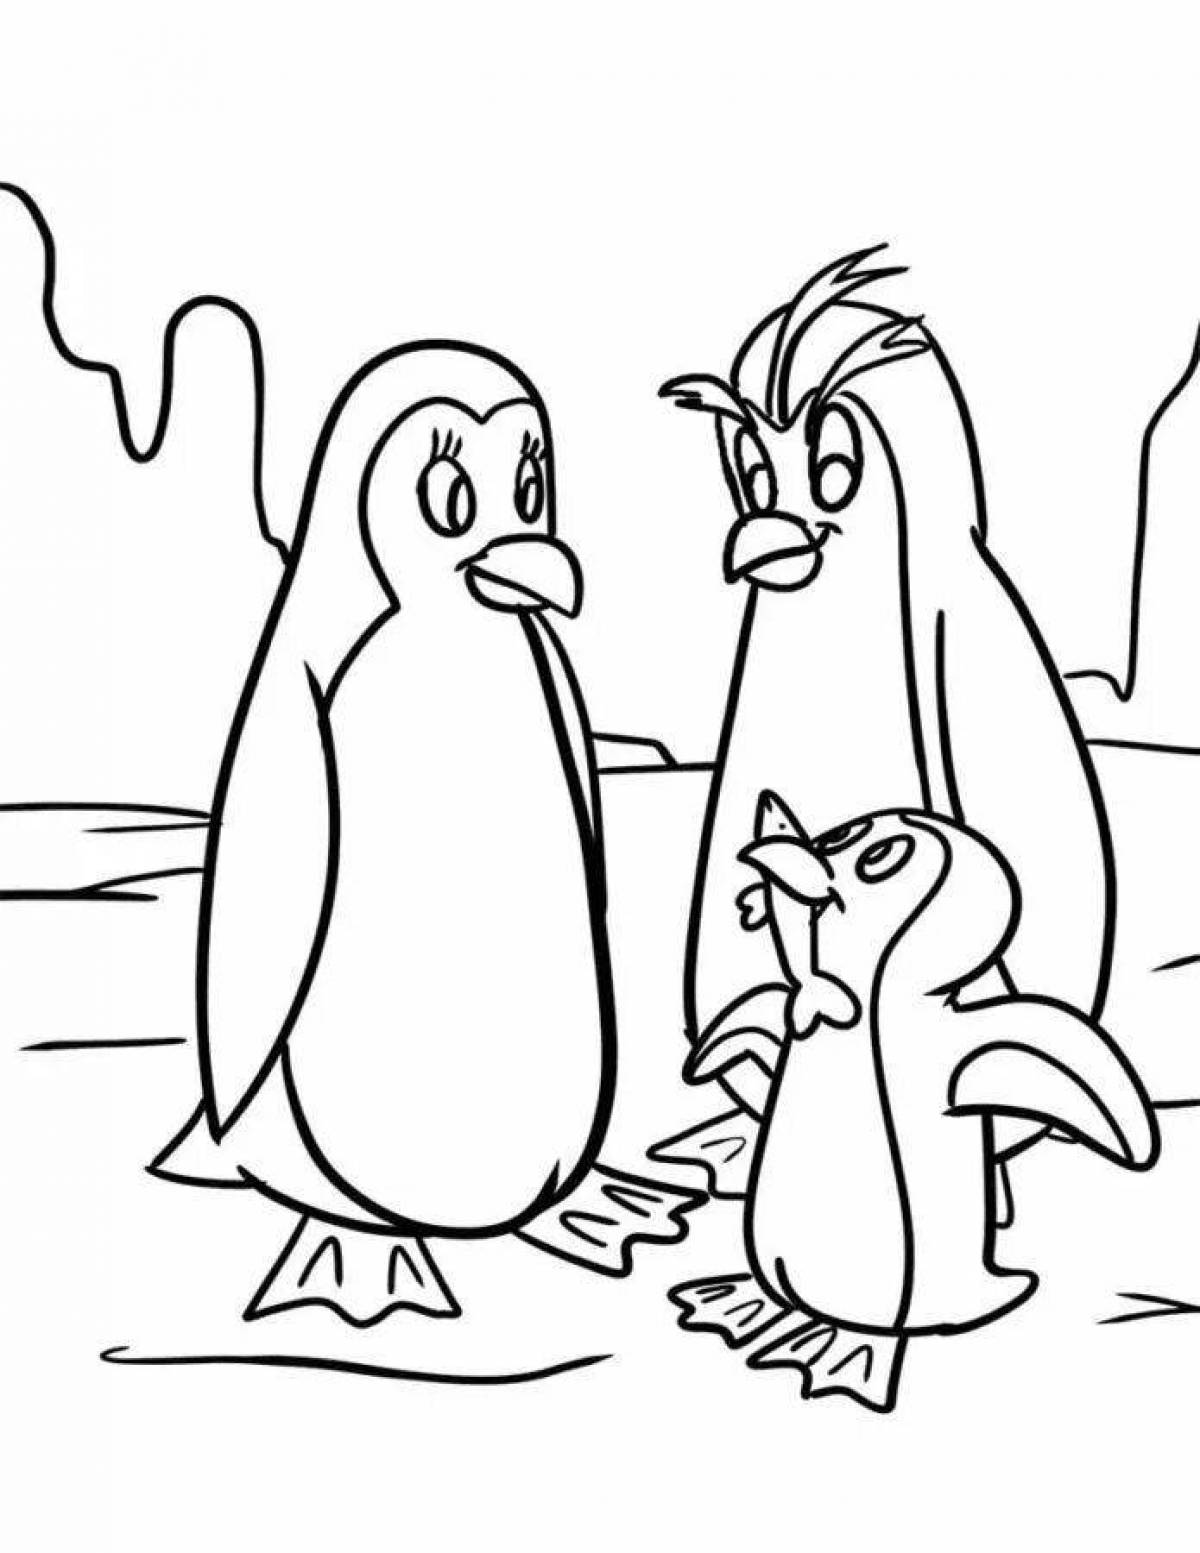 Adorable penguin coloring pages